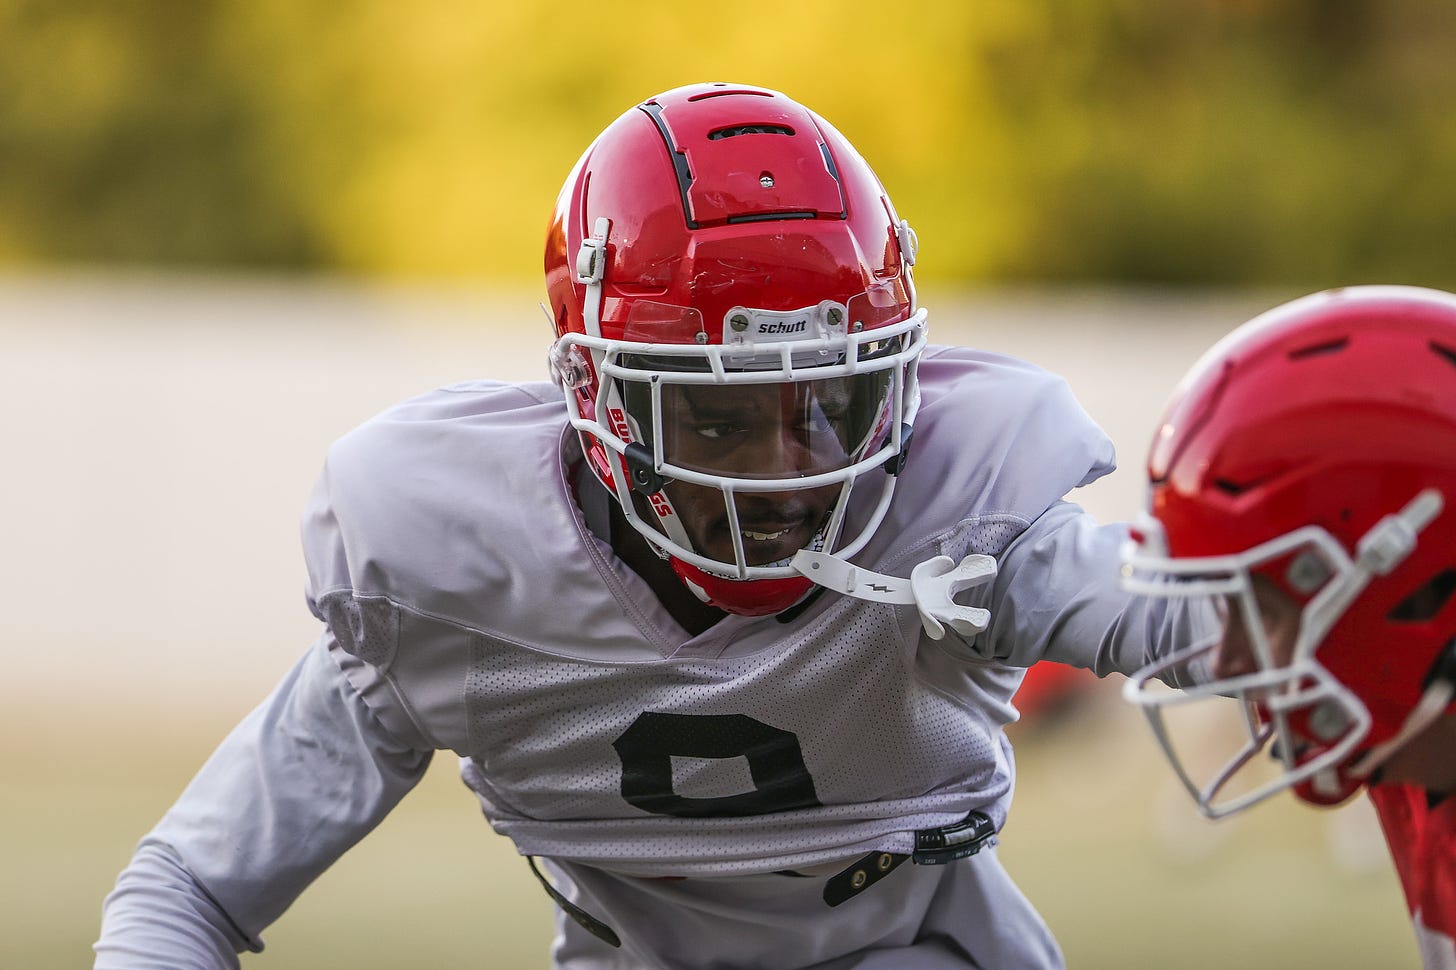 Georgia defensive back Ameer Speed (9) during the Bulldogs’ practice session in Athens, Ga., on Tuesday, Nov. 9, 2021. (Photo by Mackenzie Miles)